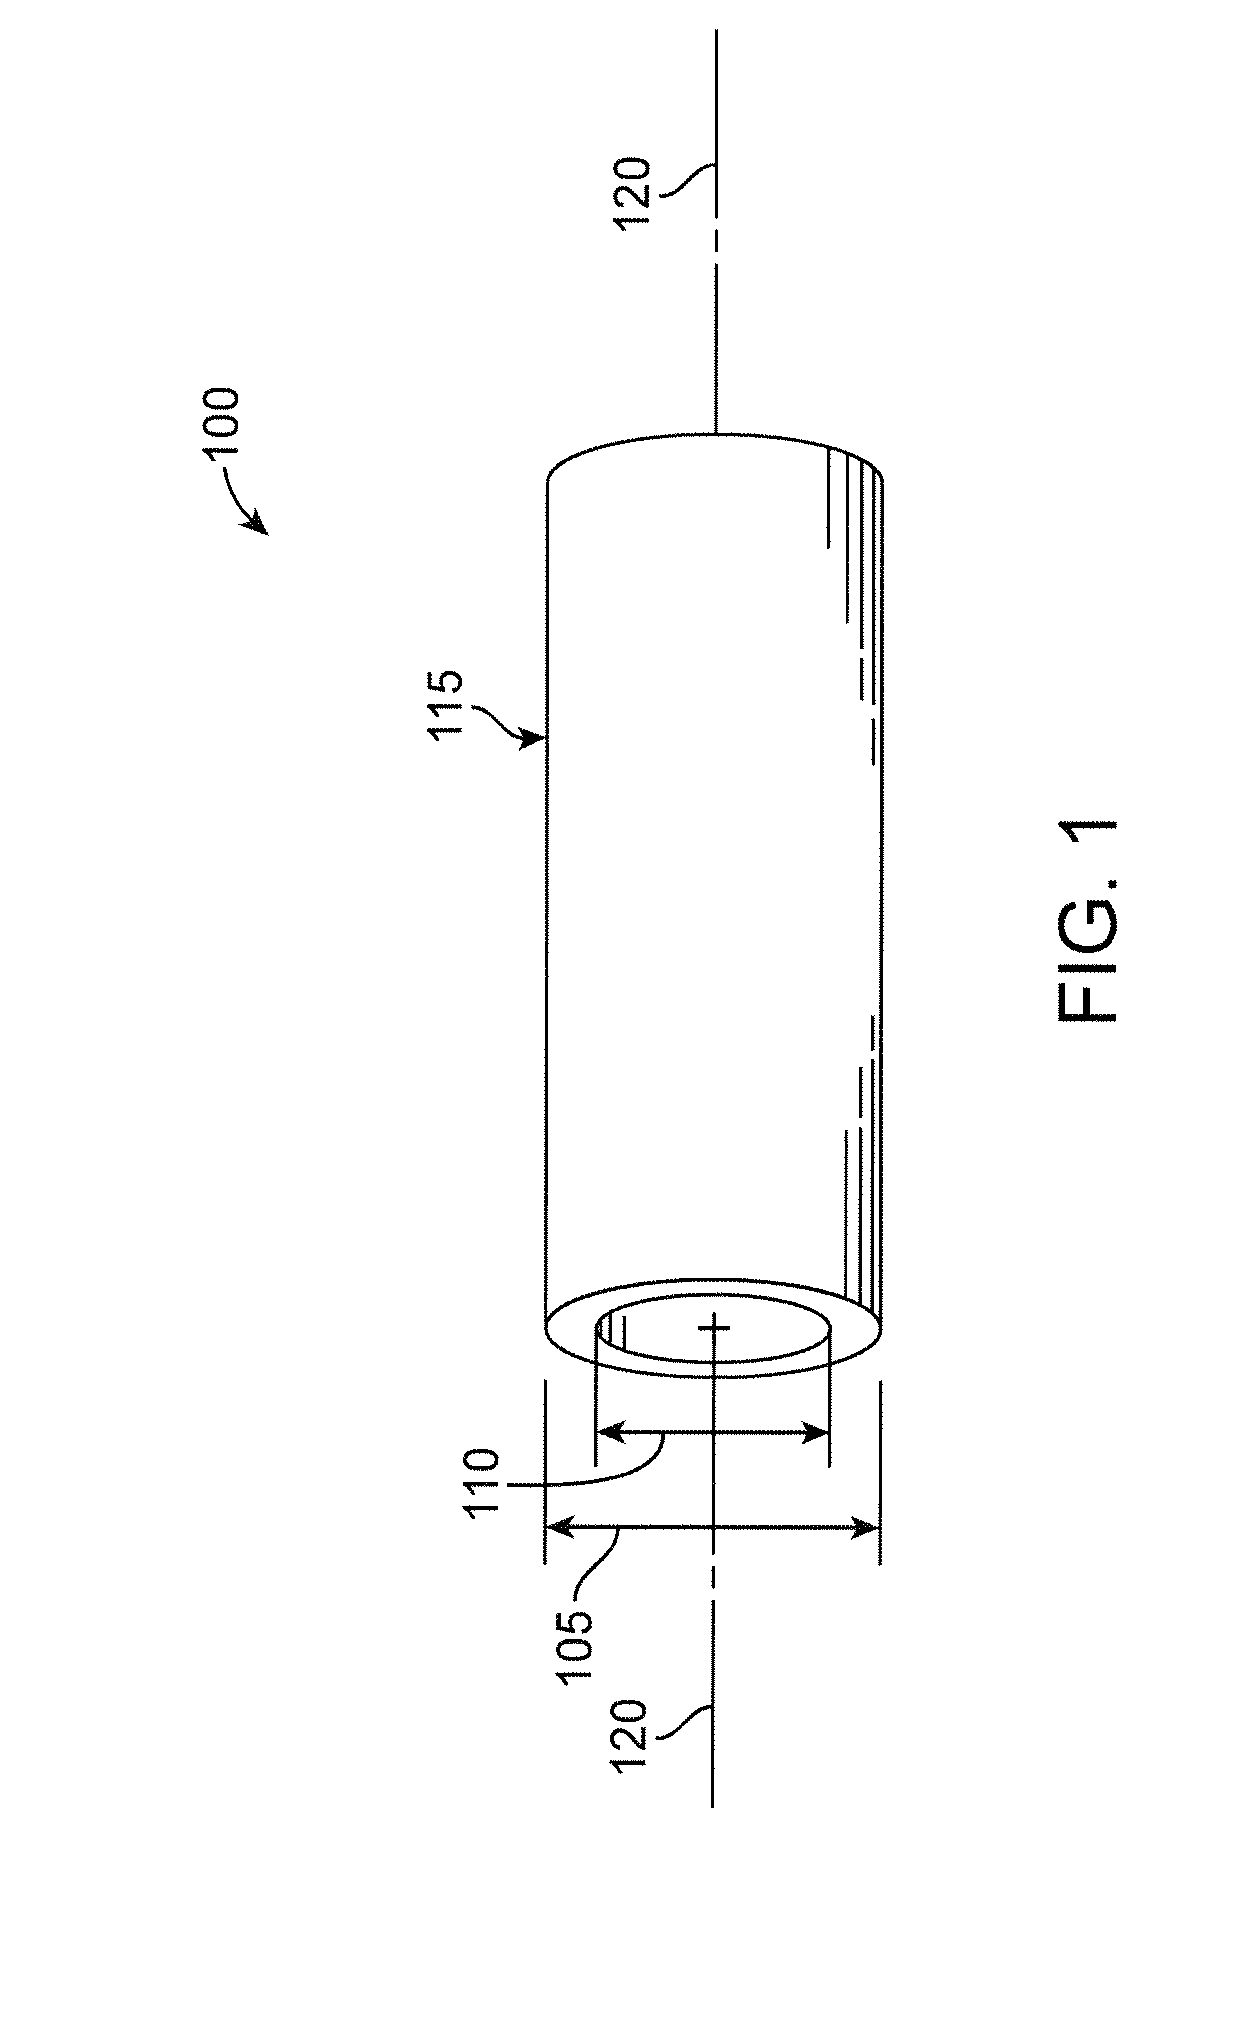 Processes for making crush recoverable polymer scaffolds